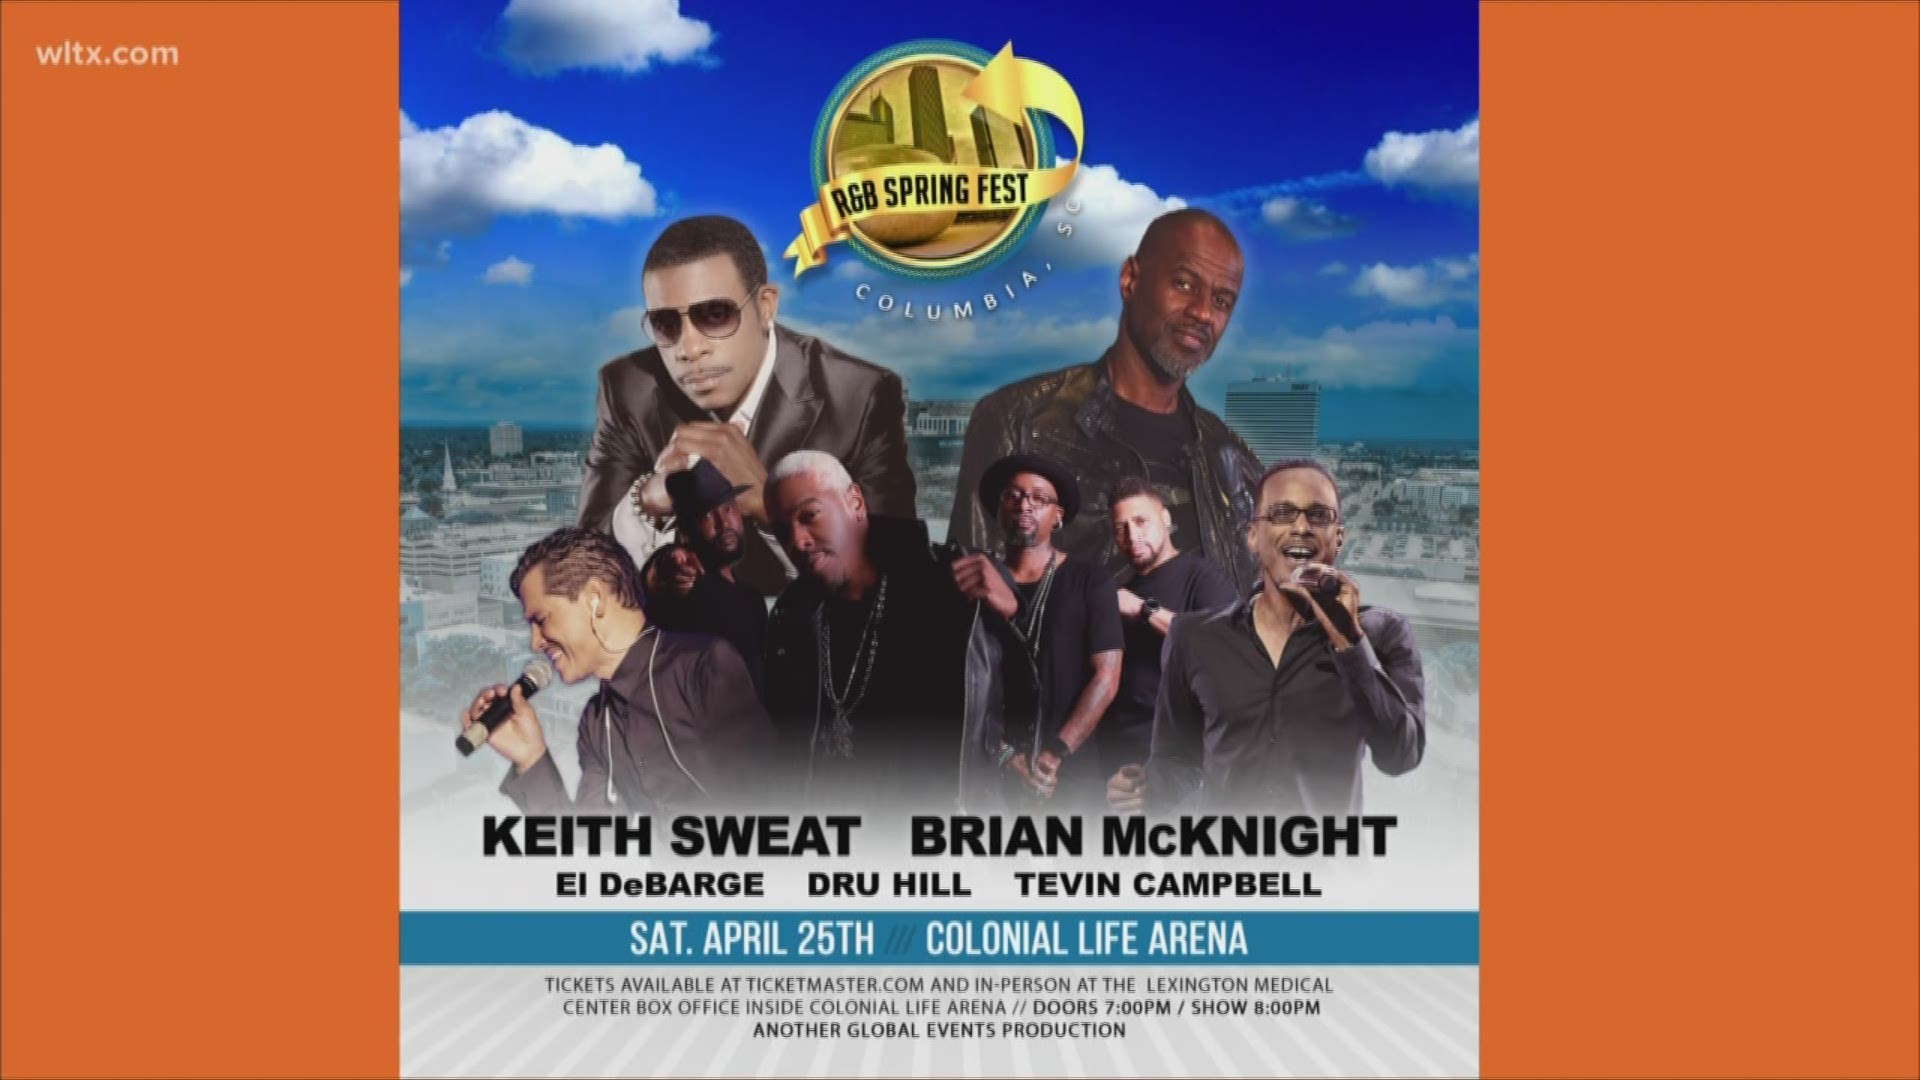 The Columbia R&B Spring Fest is set for Saturday, April 25 at the Colonial Life Arena.